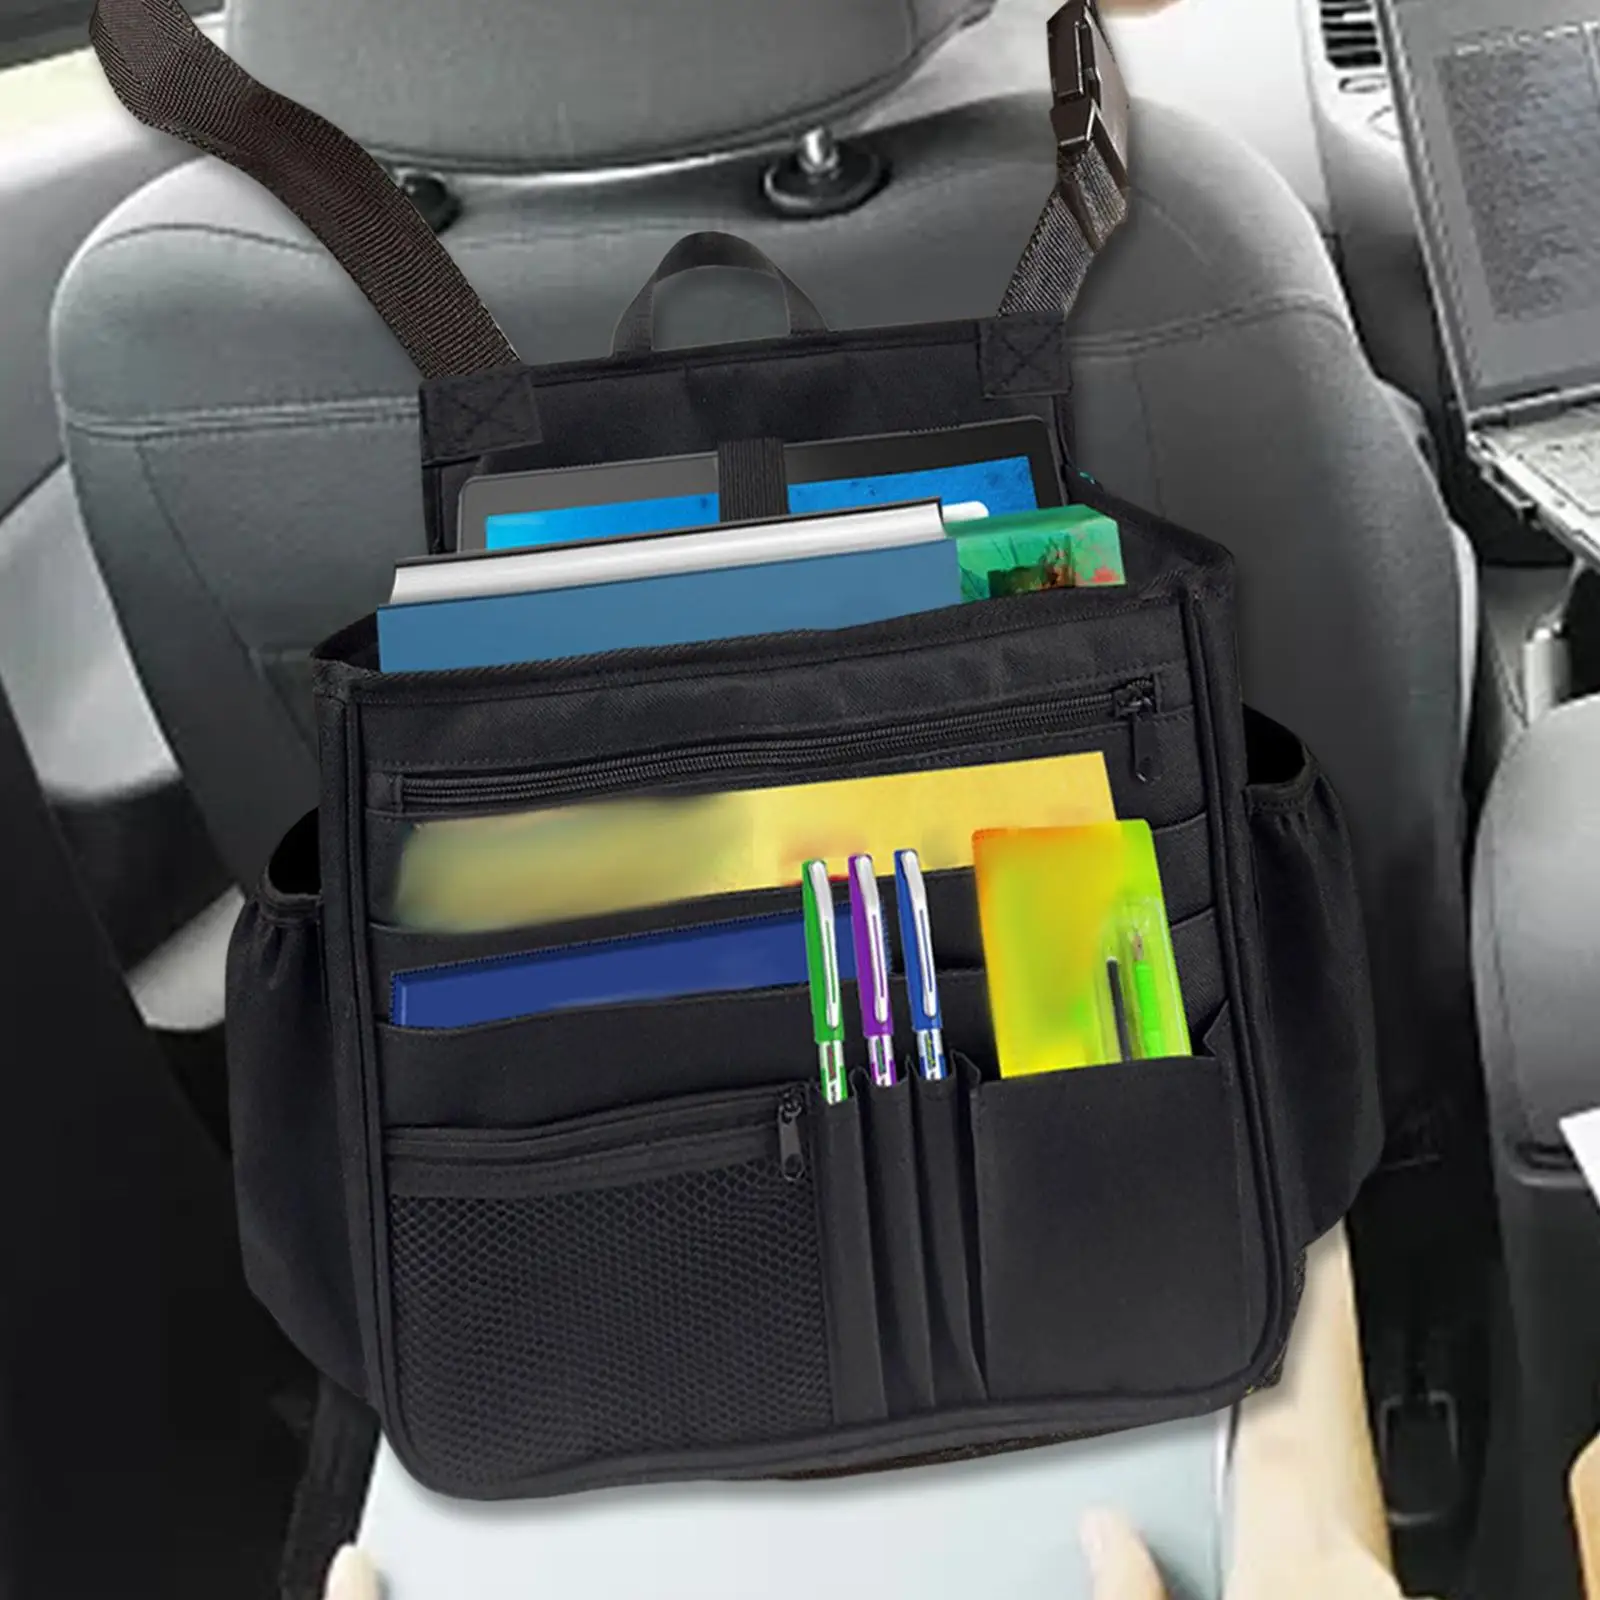 Car Backseat Organizer Durable Oxford Cloth Protector for Books Bottle